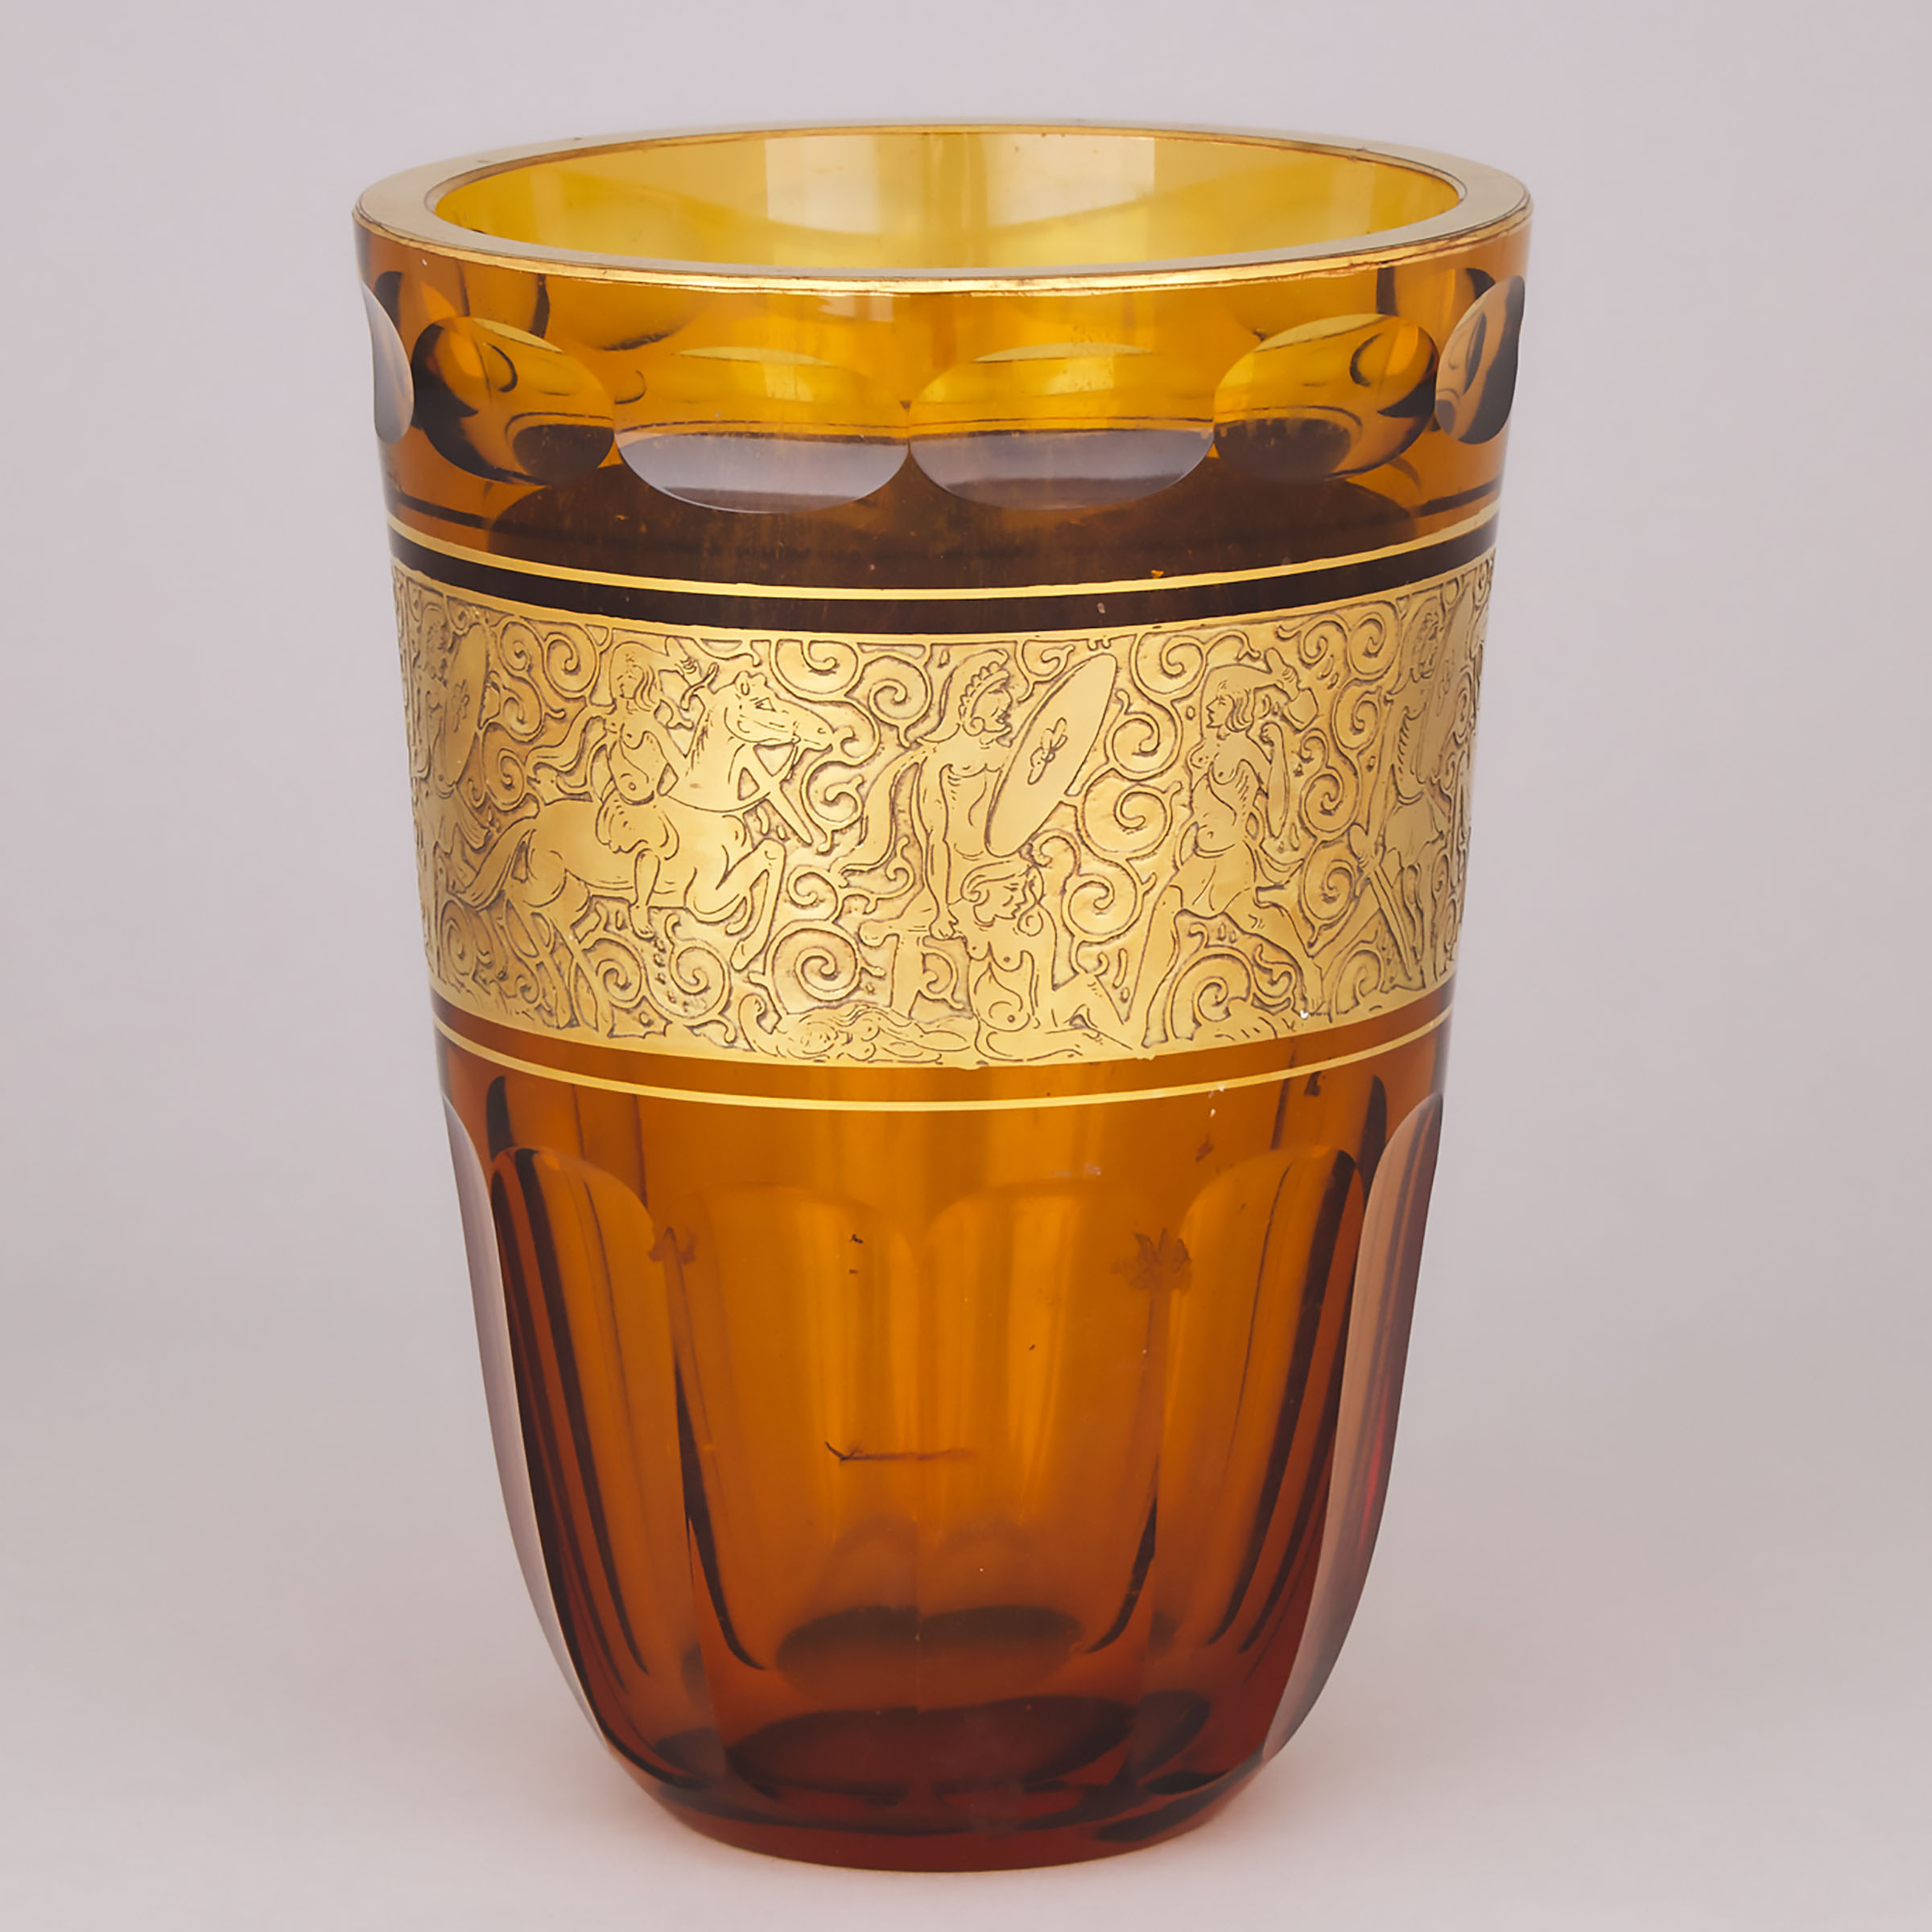 Bohemian Cut, Etched and Gilt Amber Glass Vase, probably Moser, mid-20th century